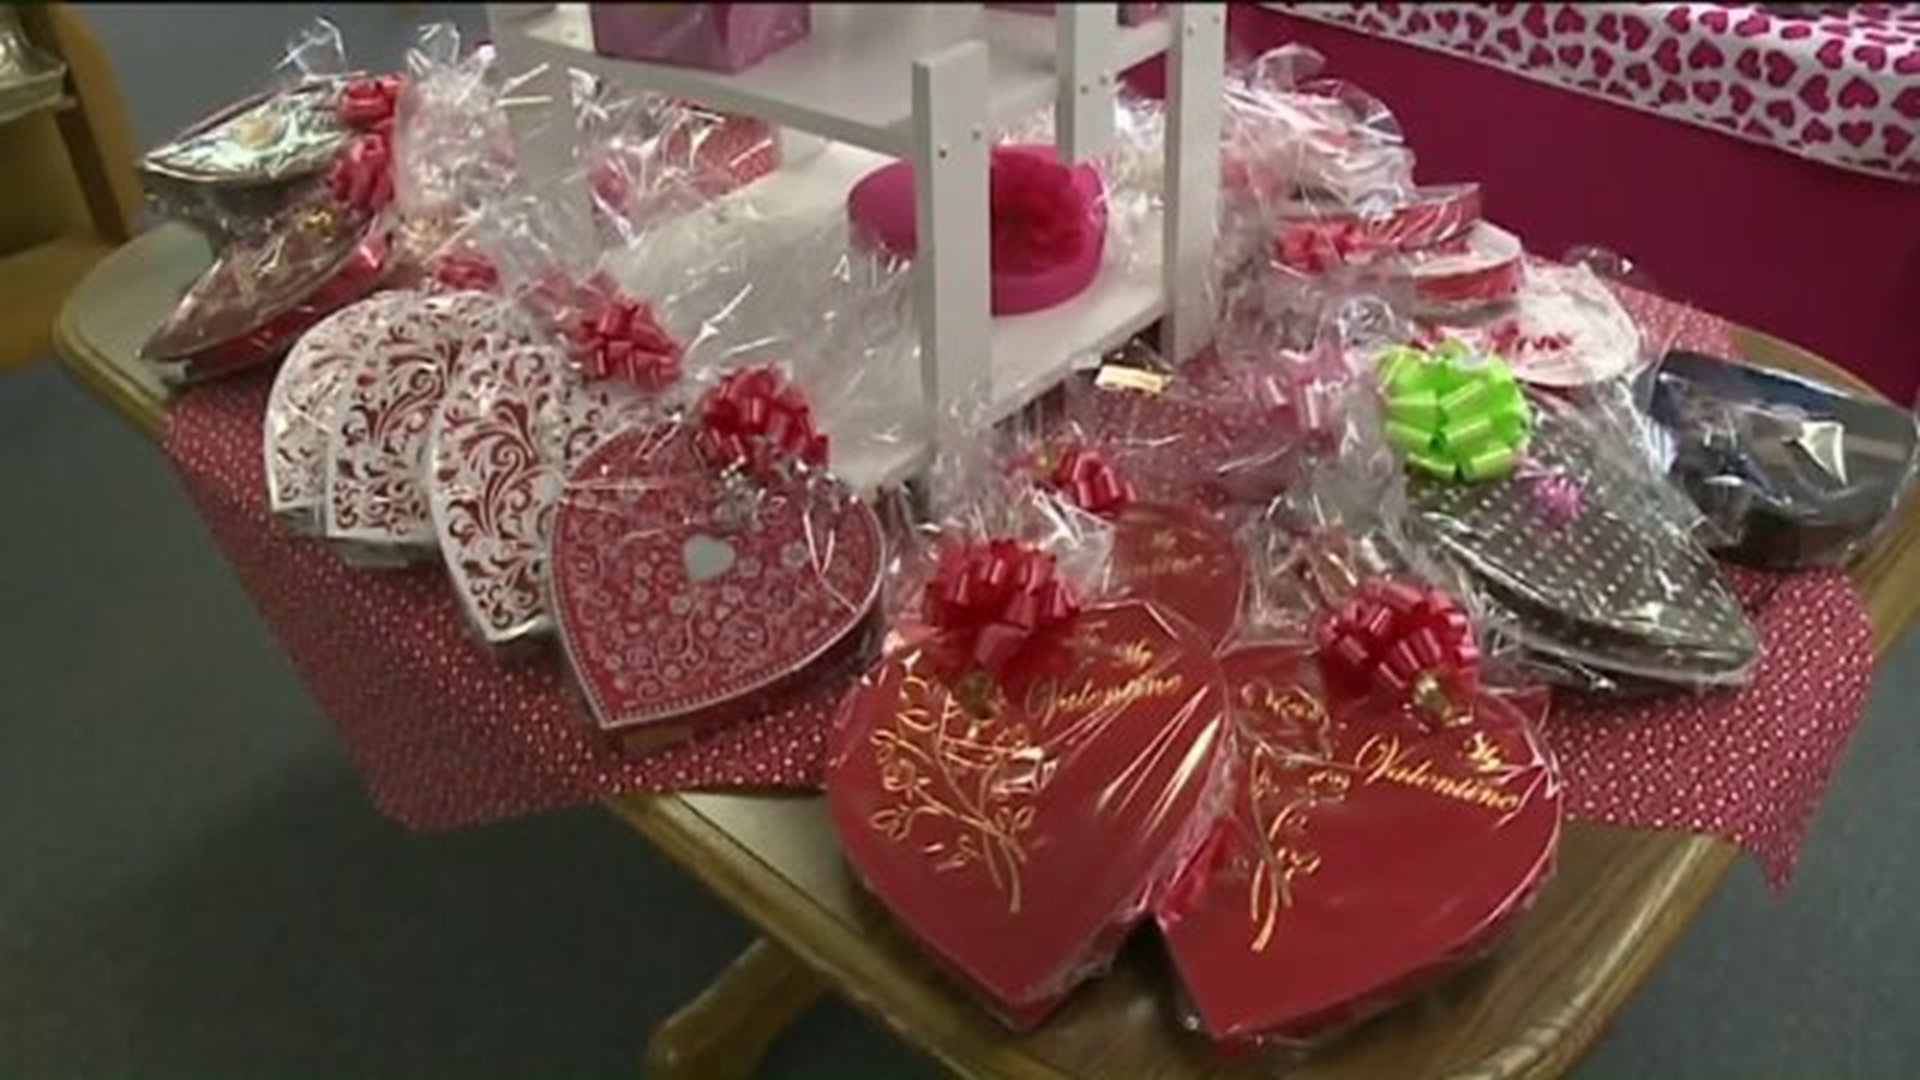 Sweet Treats for Valentine's Day